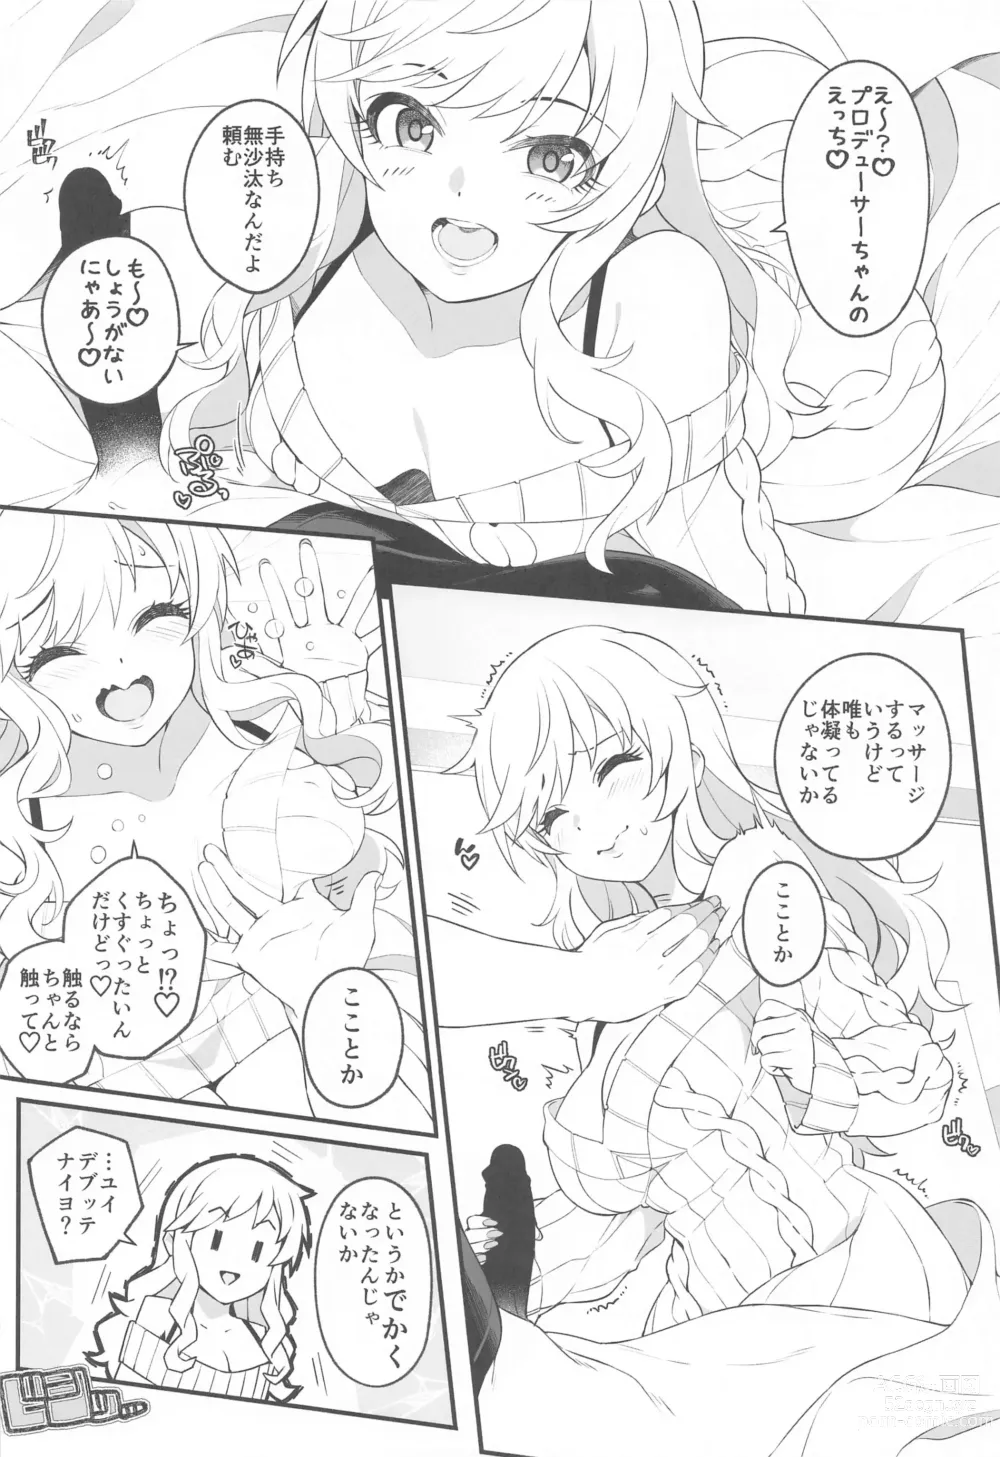 Page 9 of doujinshi Torima Pakocchao - You dont have to think about difficult things, do you?